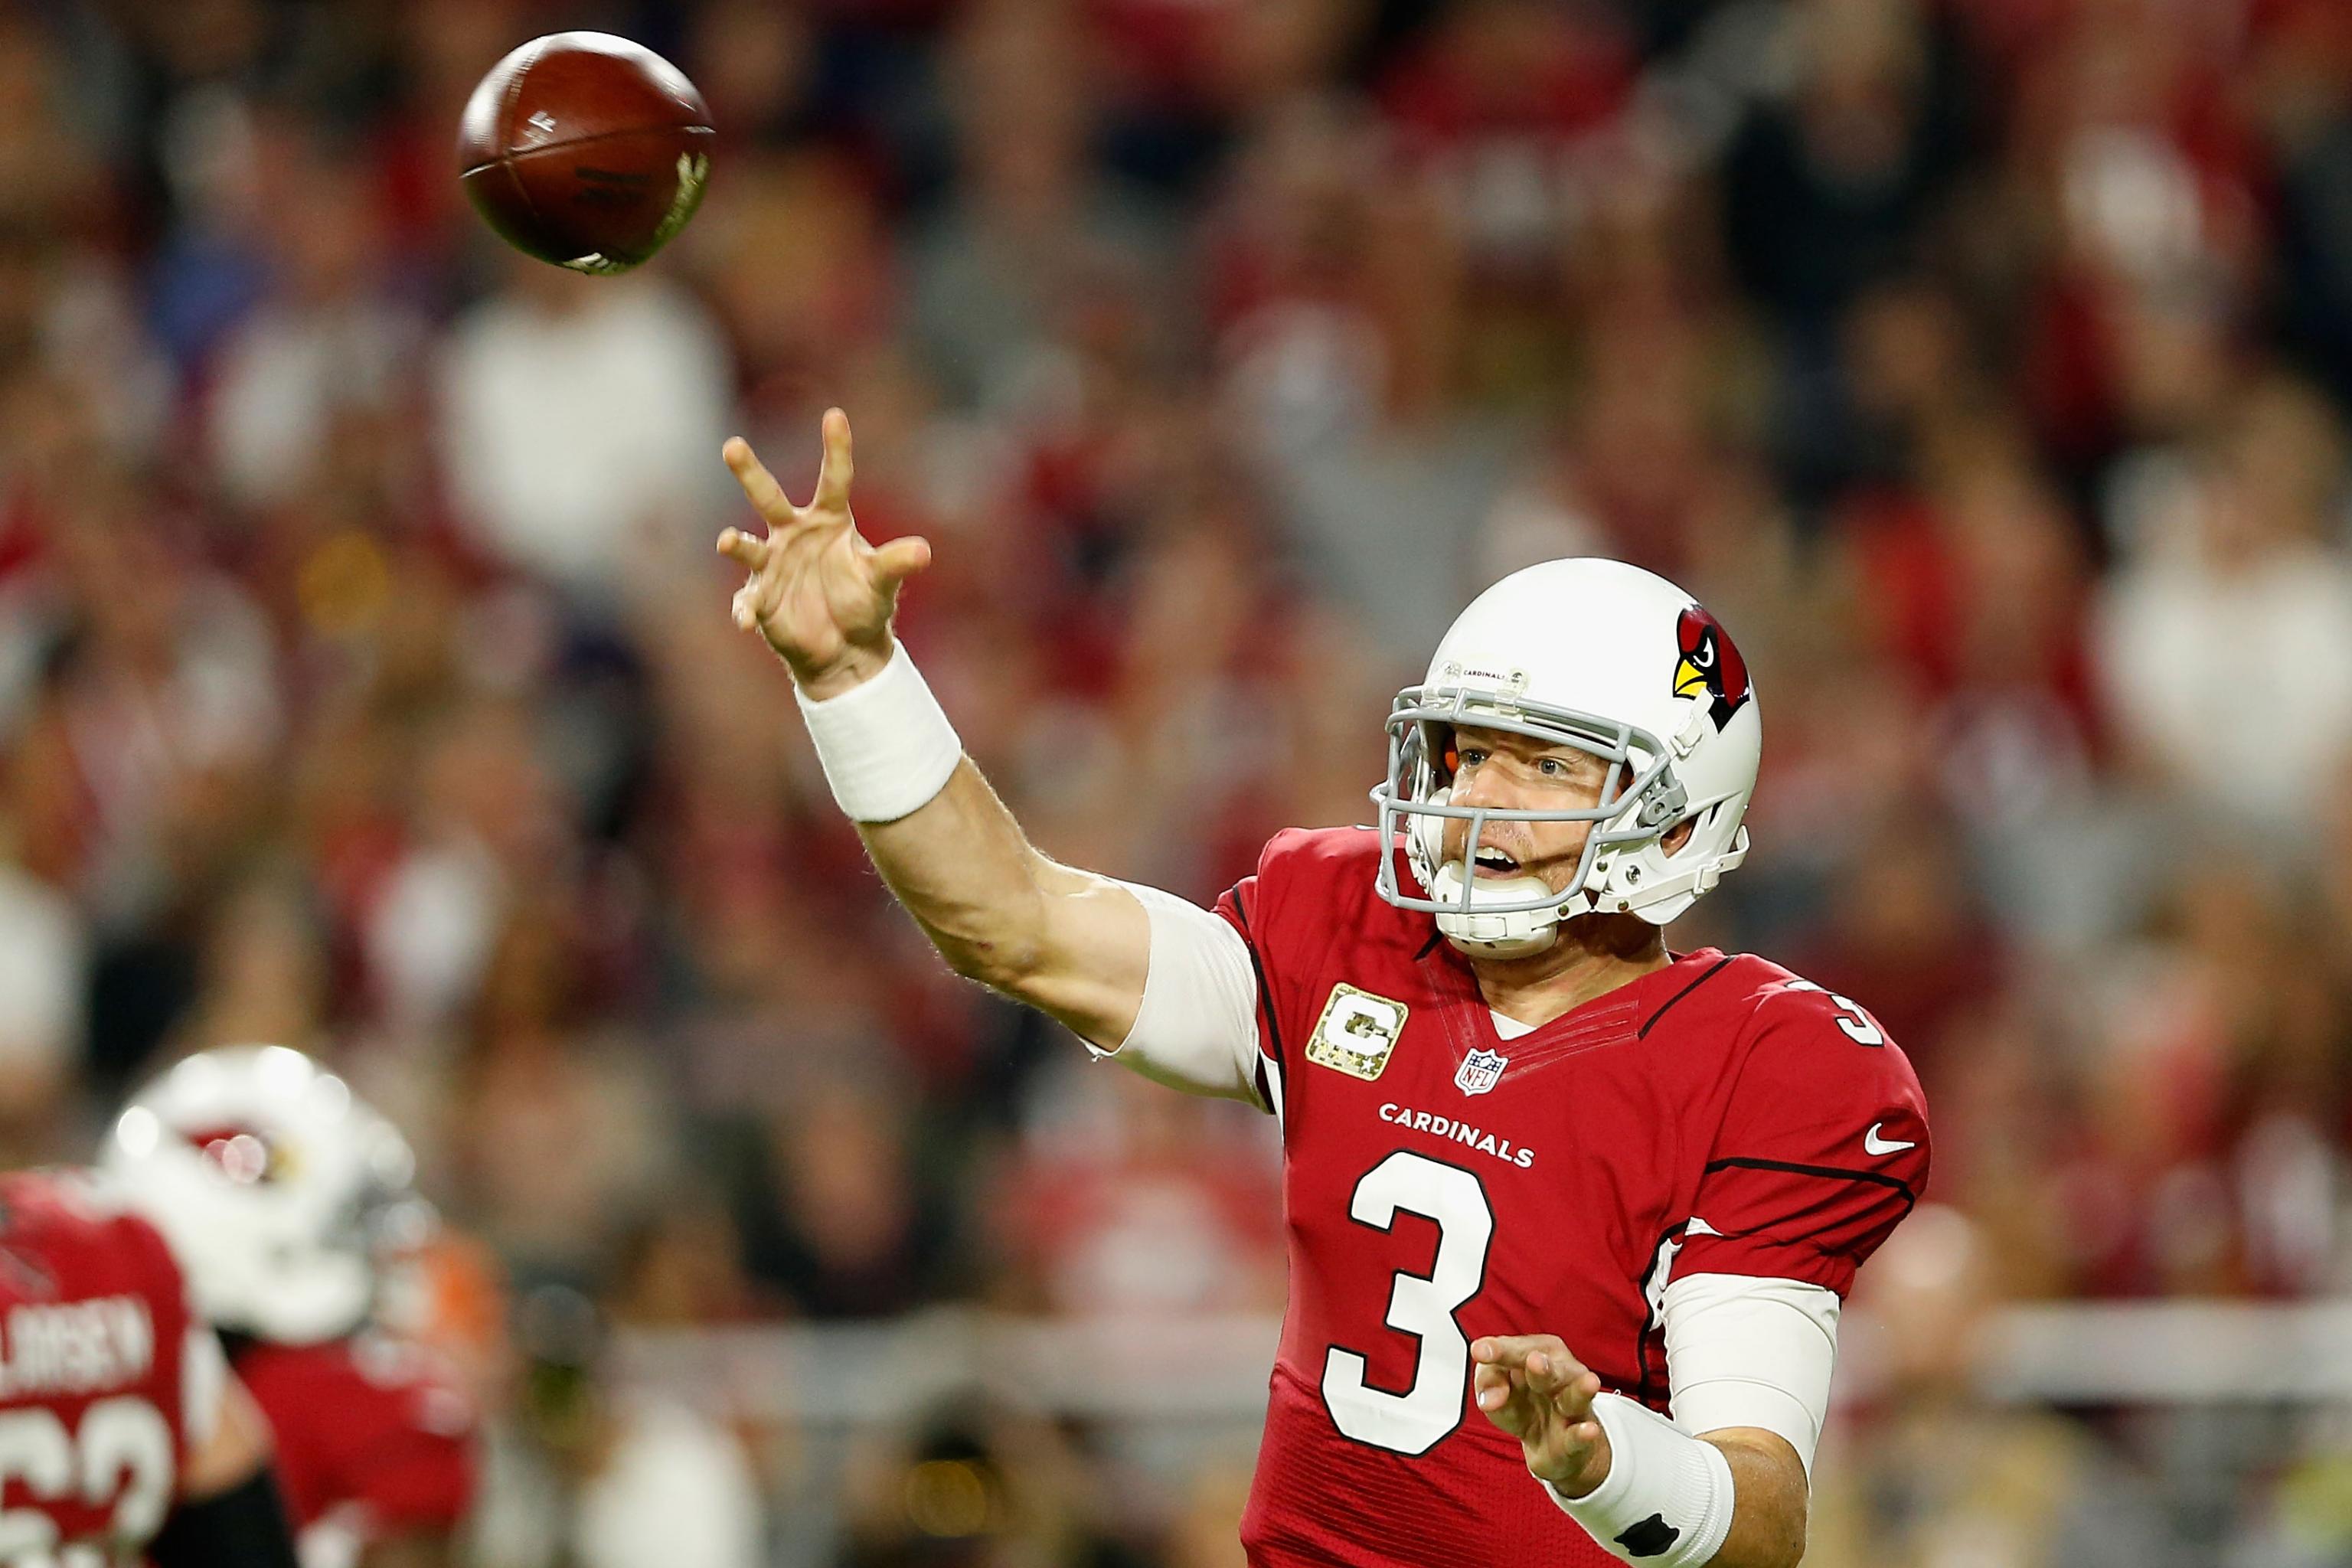 Cardinals 11 vs. 34 Rams summary: scores, stats and highlights